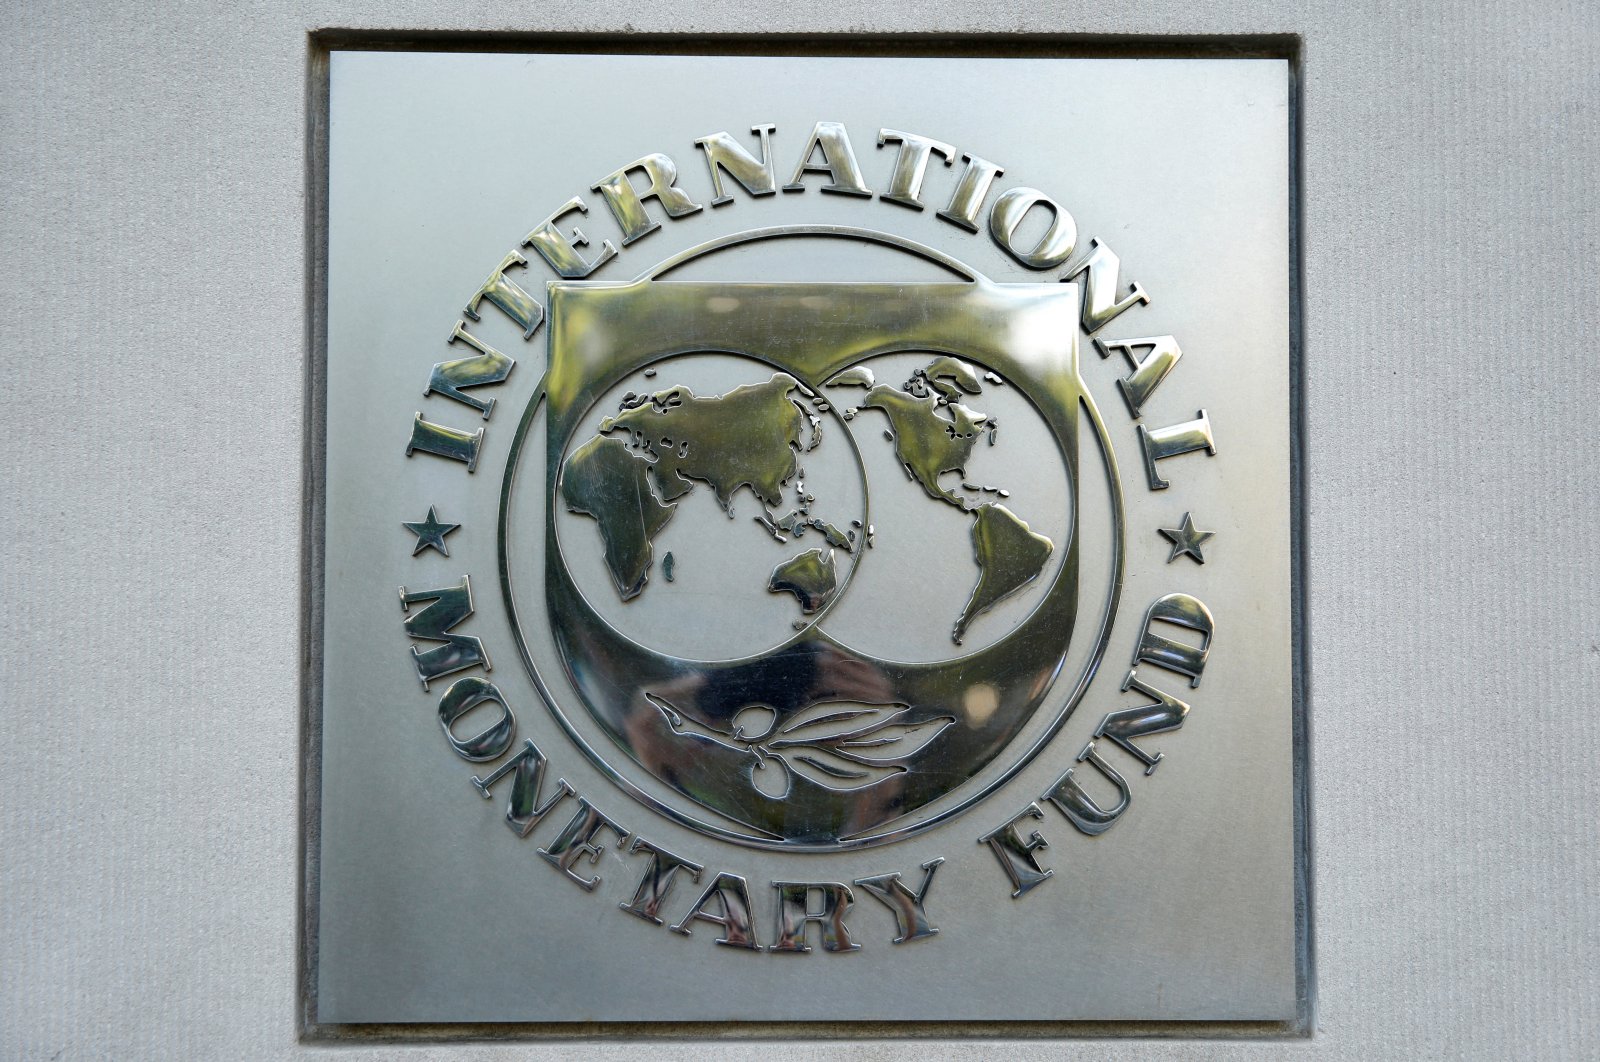 The International Monetary Fund logo is seen at the IMF headquarters building in Washington, U.S., Oct. 14, 2017. (Reuters Photo)